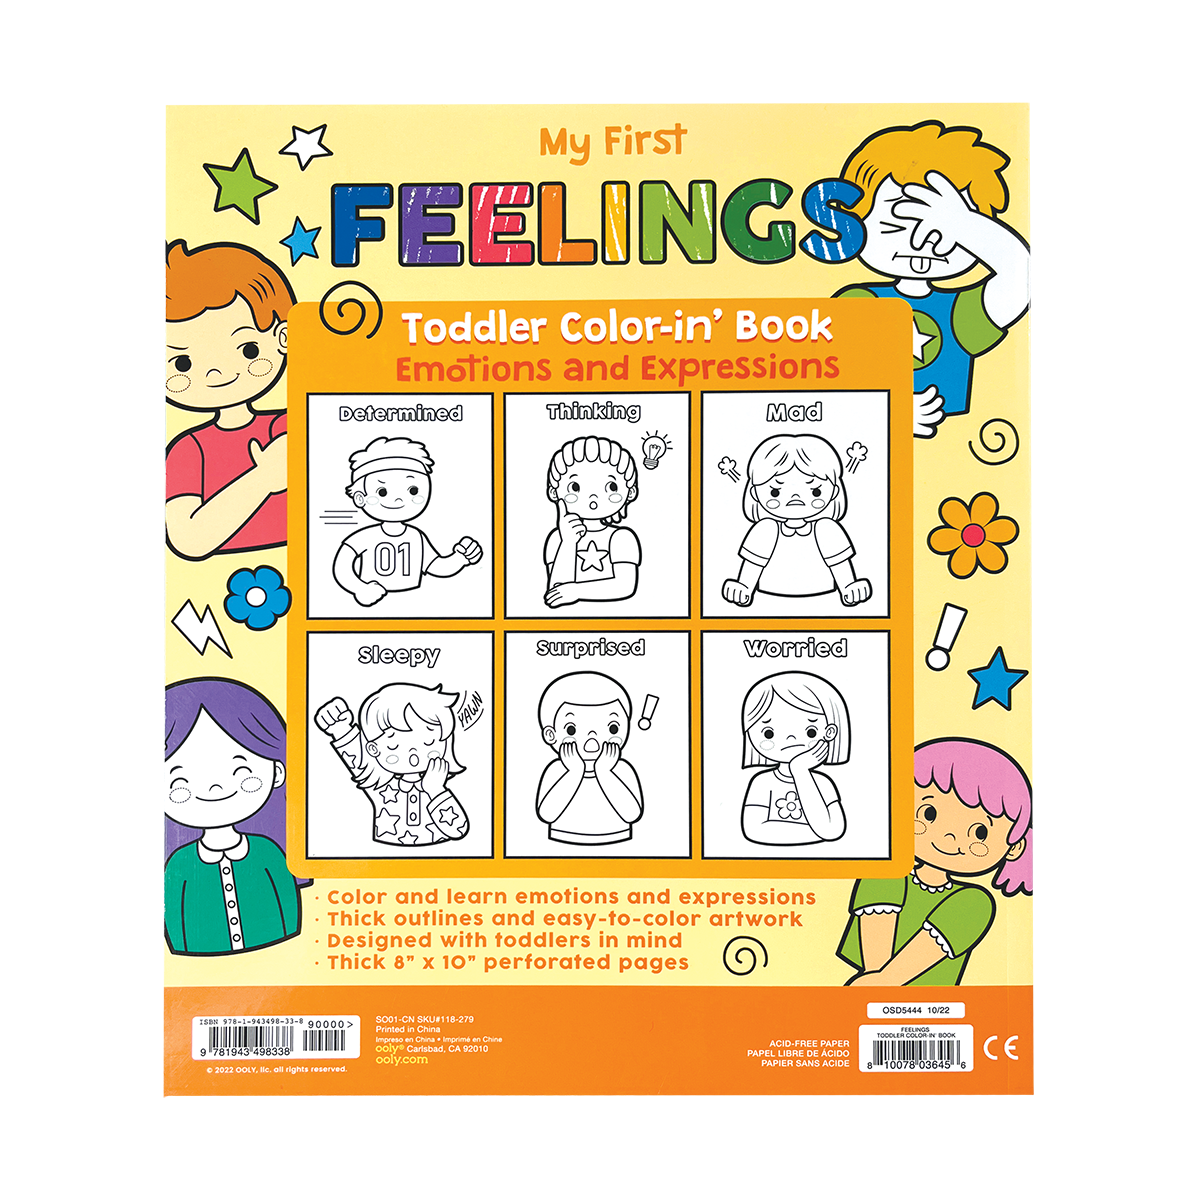 OOLY My First Feelings Toddler Color-in Book back cover